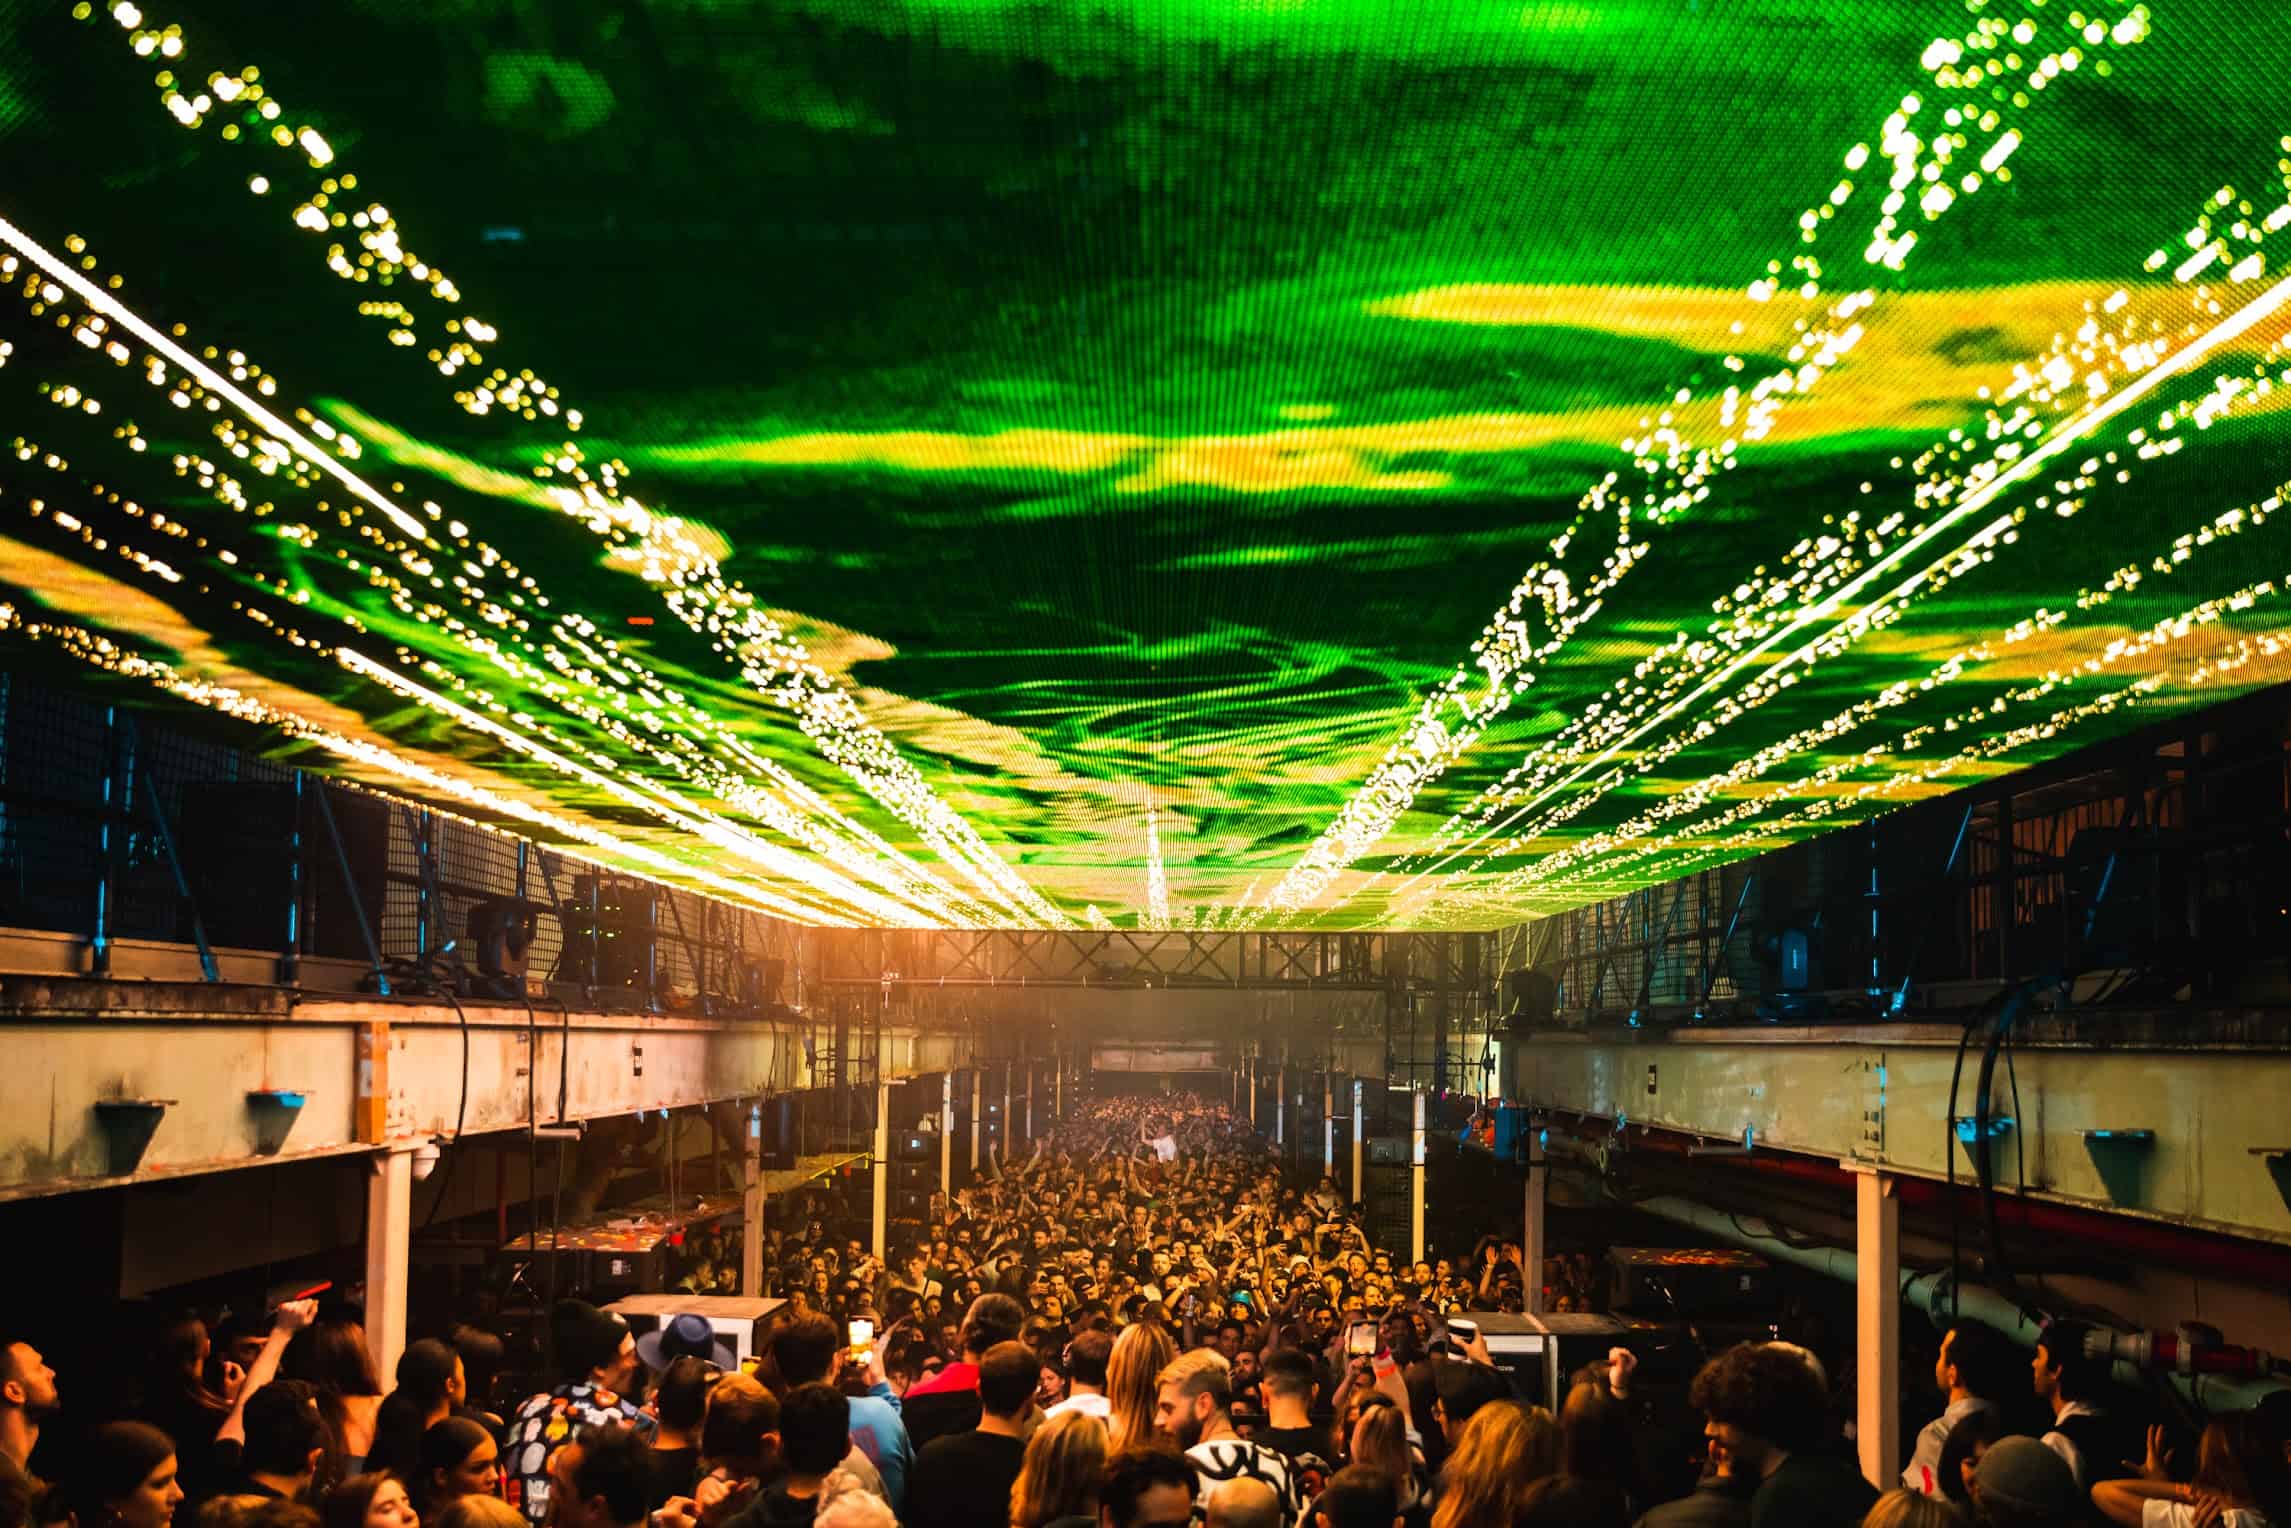 One in five UK nightclubs have closed their doors since the start of the pandemic